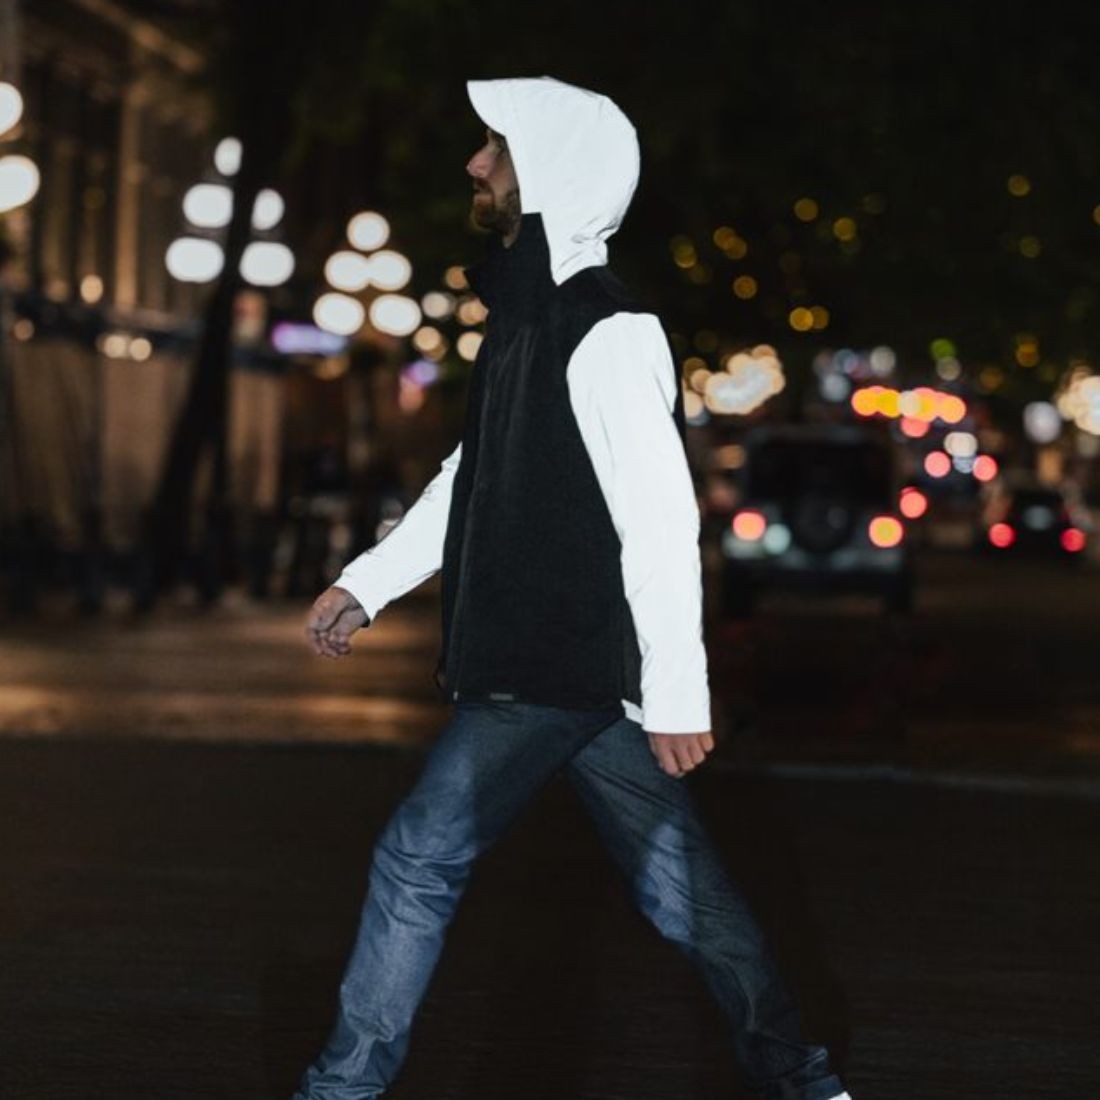 THE CITYLIGHT - 2 in 1 reflective jacket